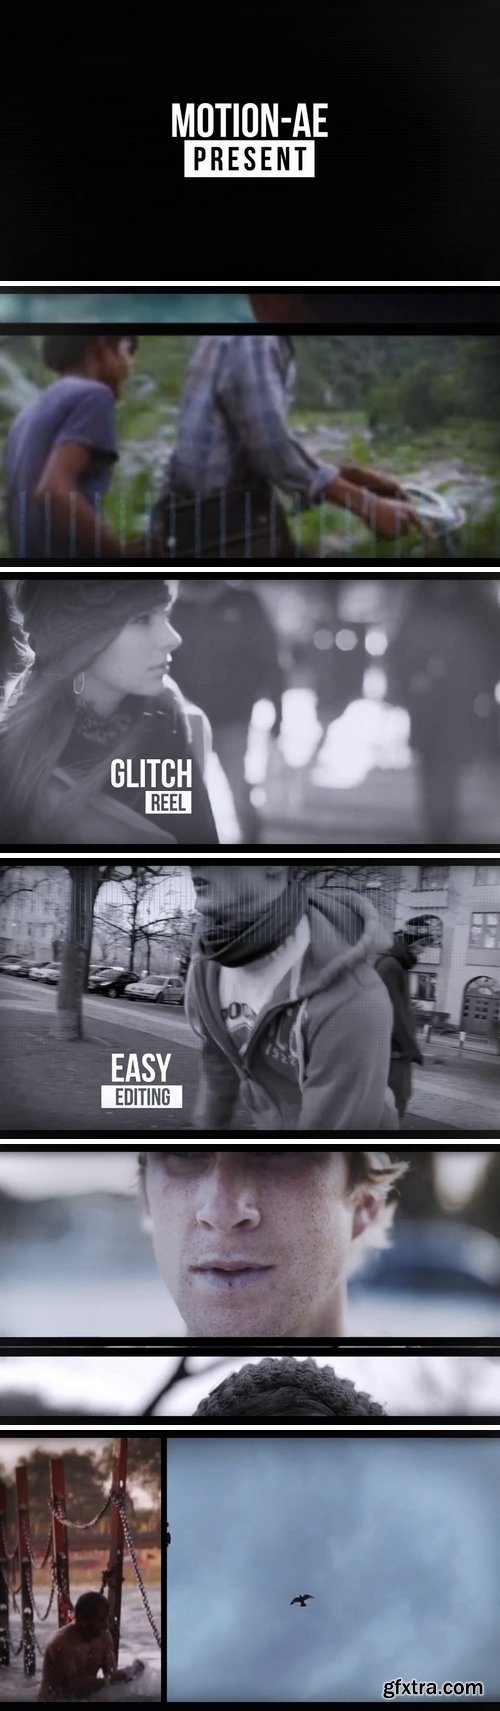 MotionArray - Dubstep Glitch Opener After Effects Templates 60500